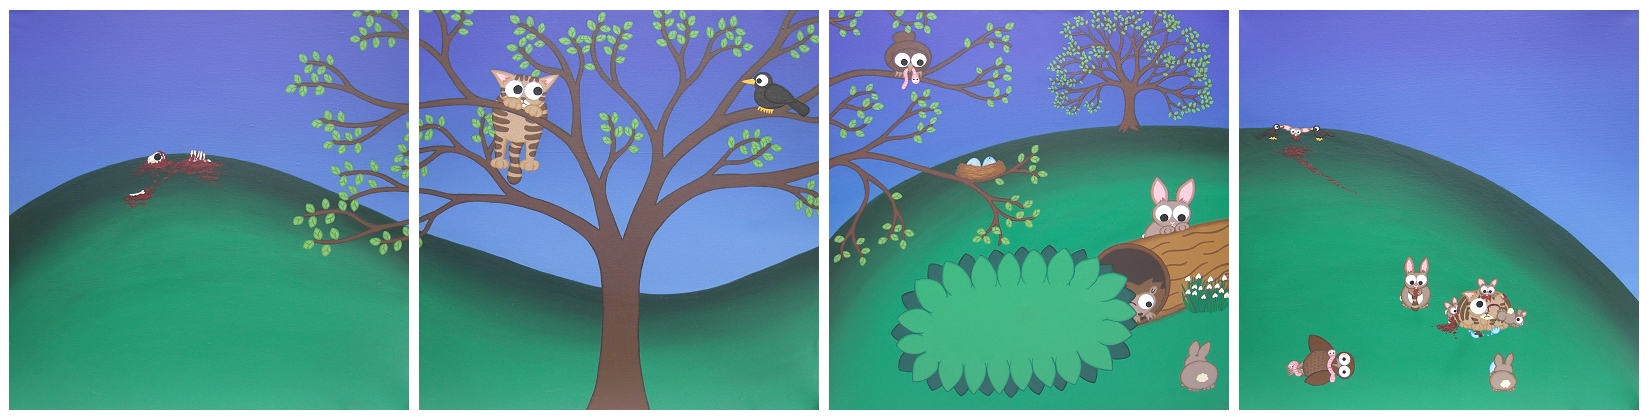 A cartoon landscape set in spring painted over 4 panels. 2 panels are cute, and 2 panels turn darker with prey animals getting their revenge on the predators